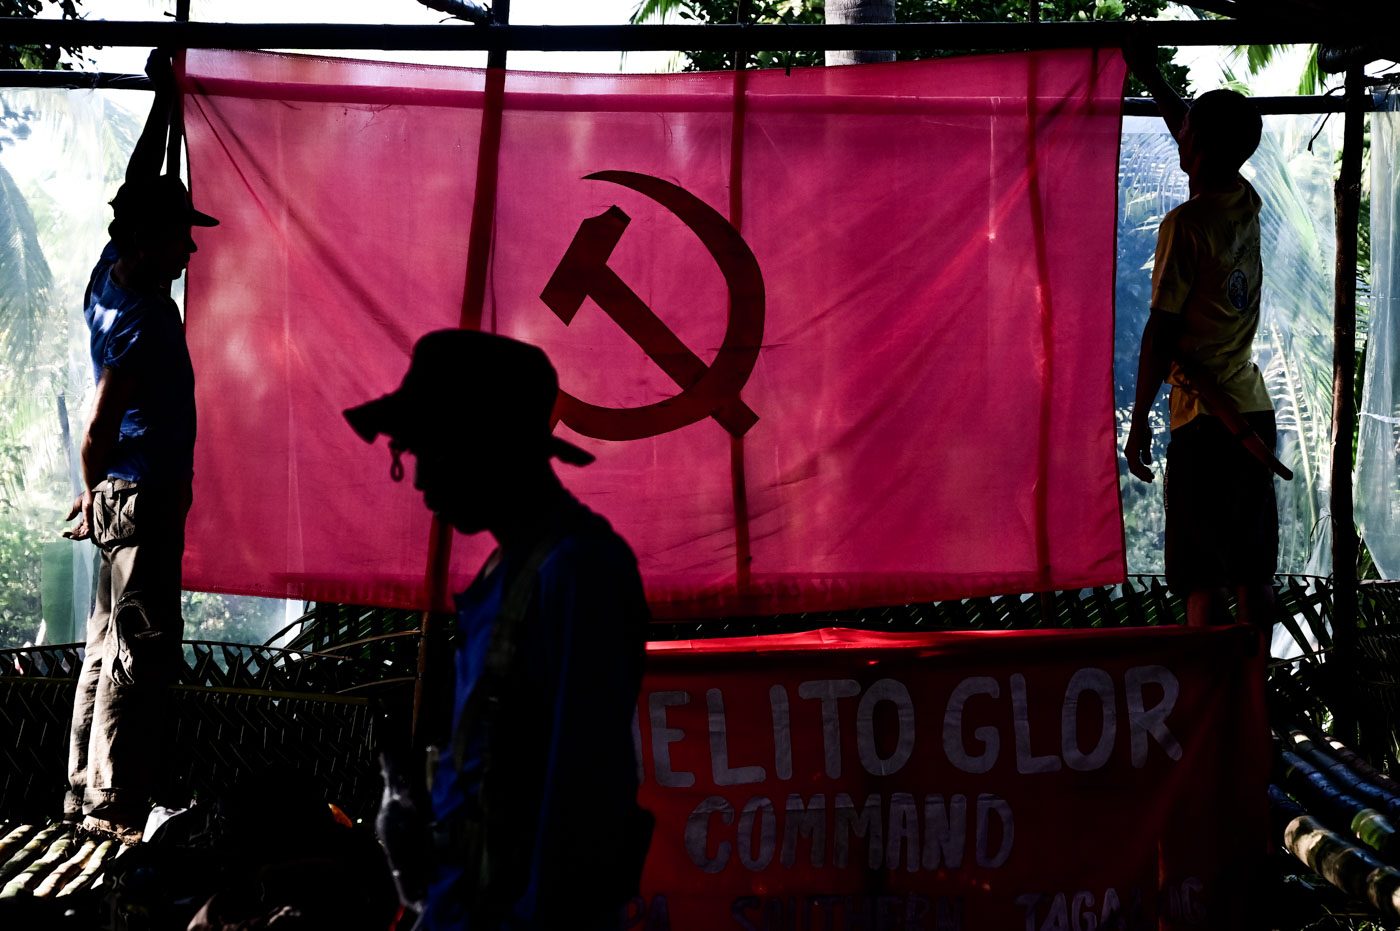 LOOK: The Communist Party of the Philippines at 50